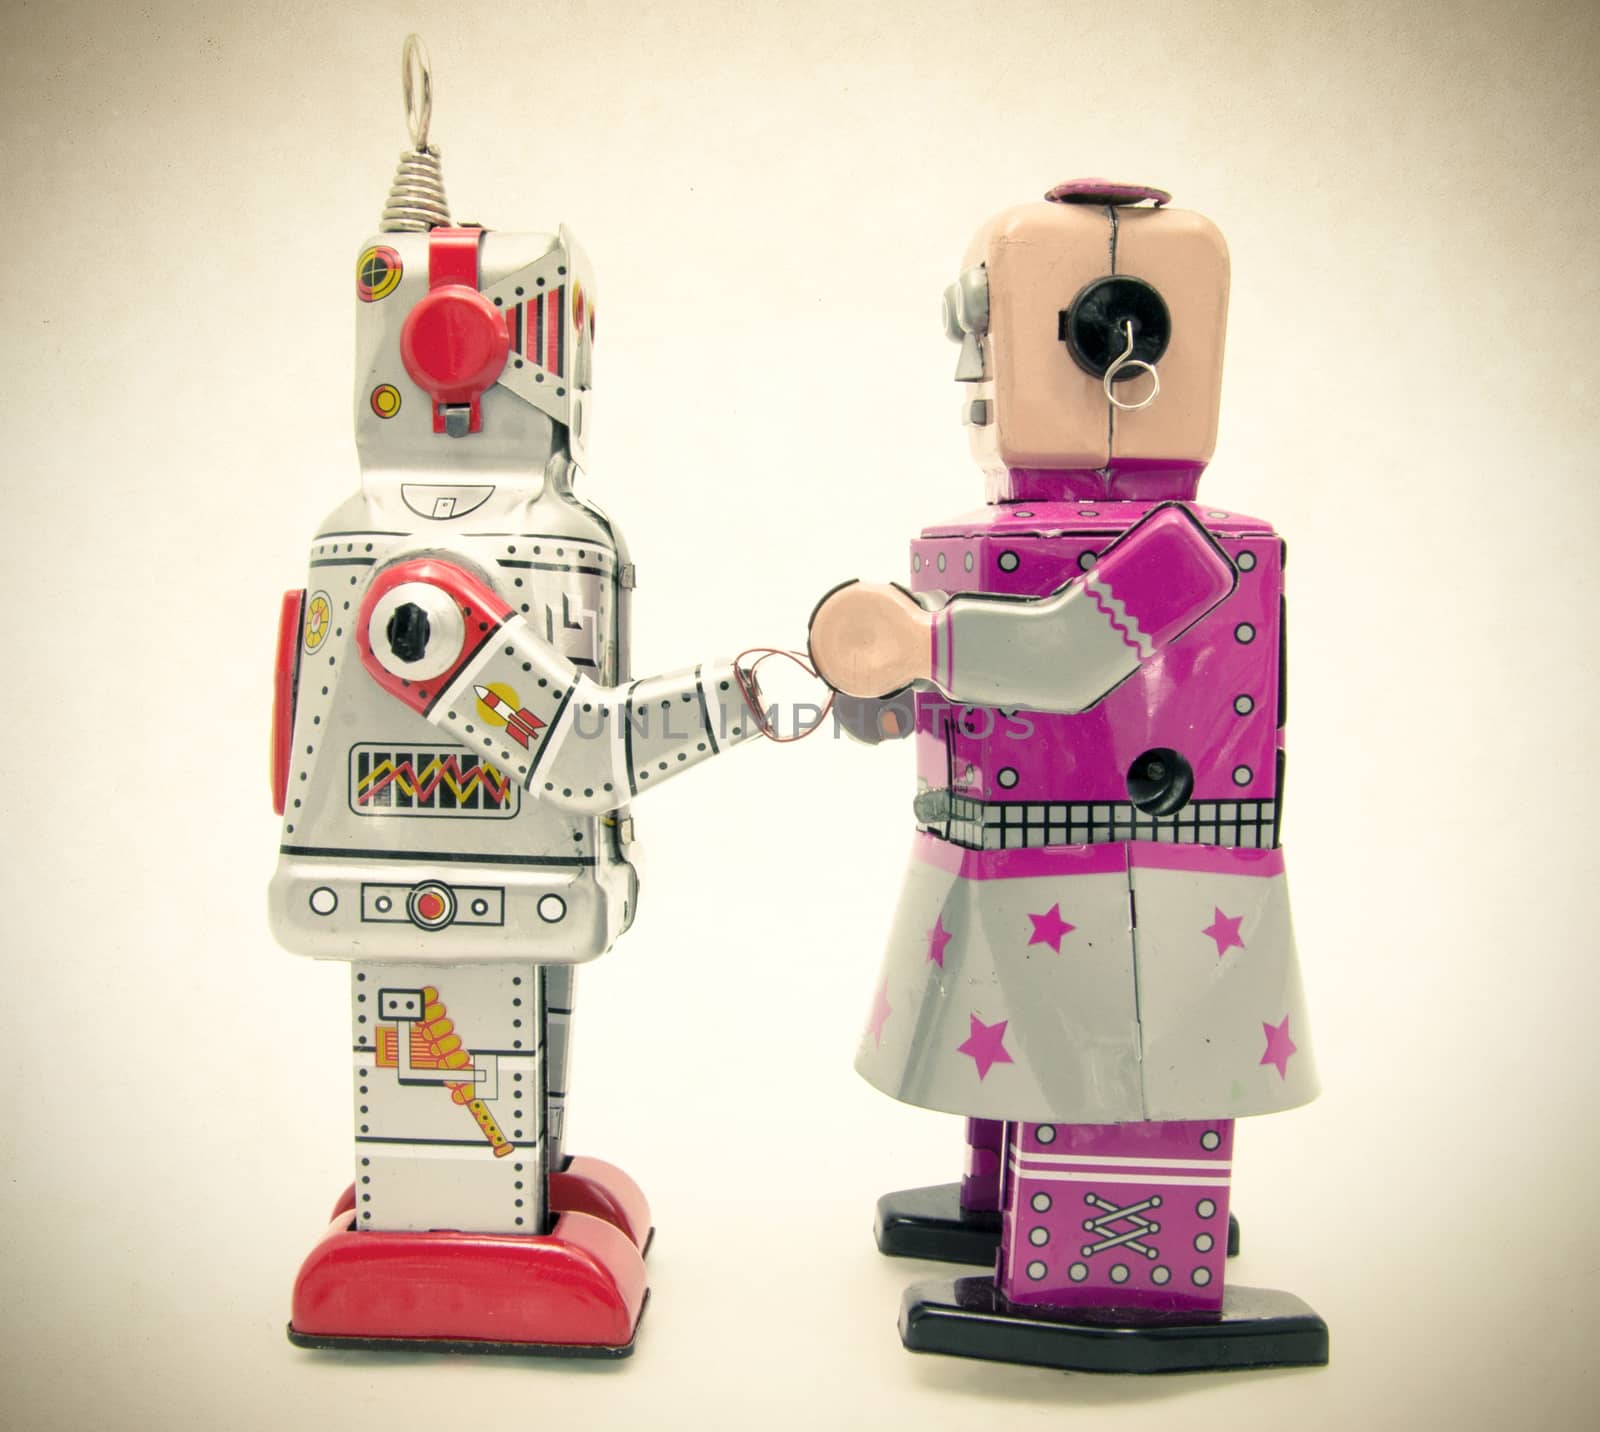 concept romatic love with vintage robot toys